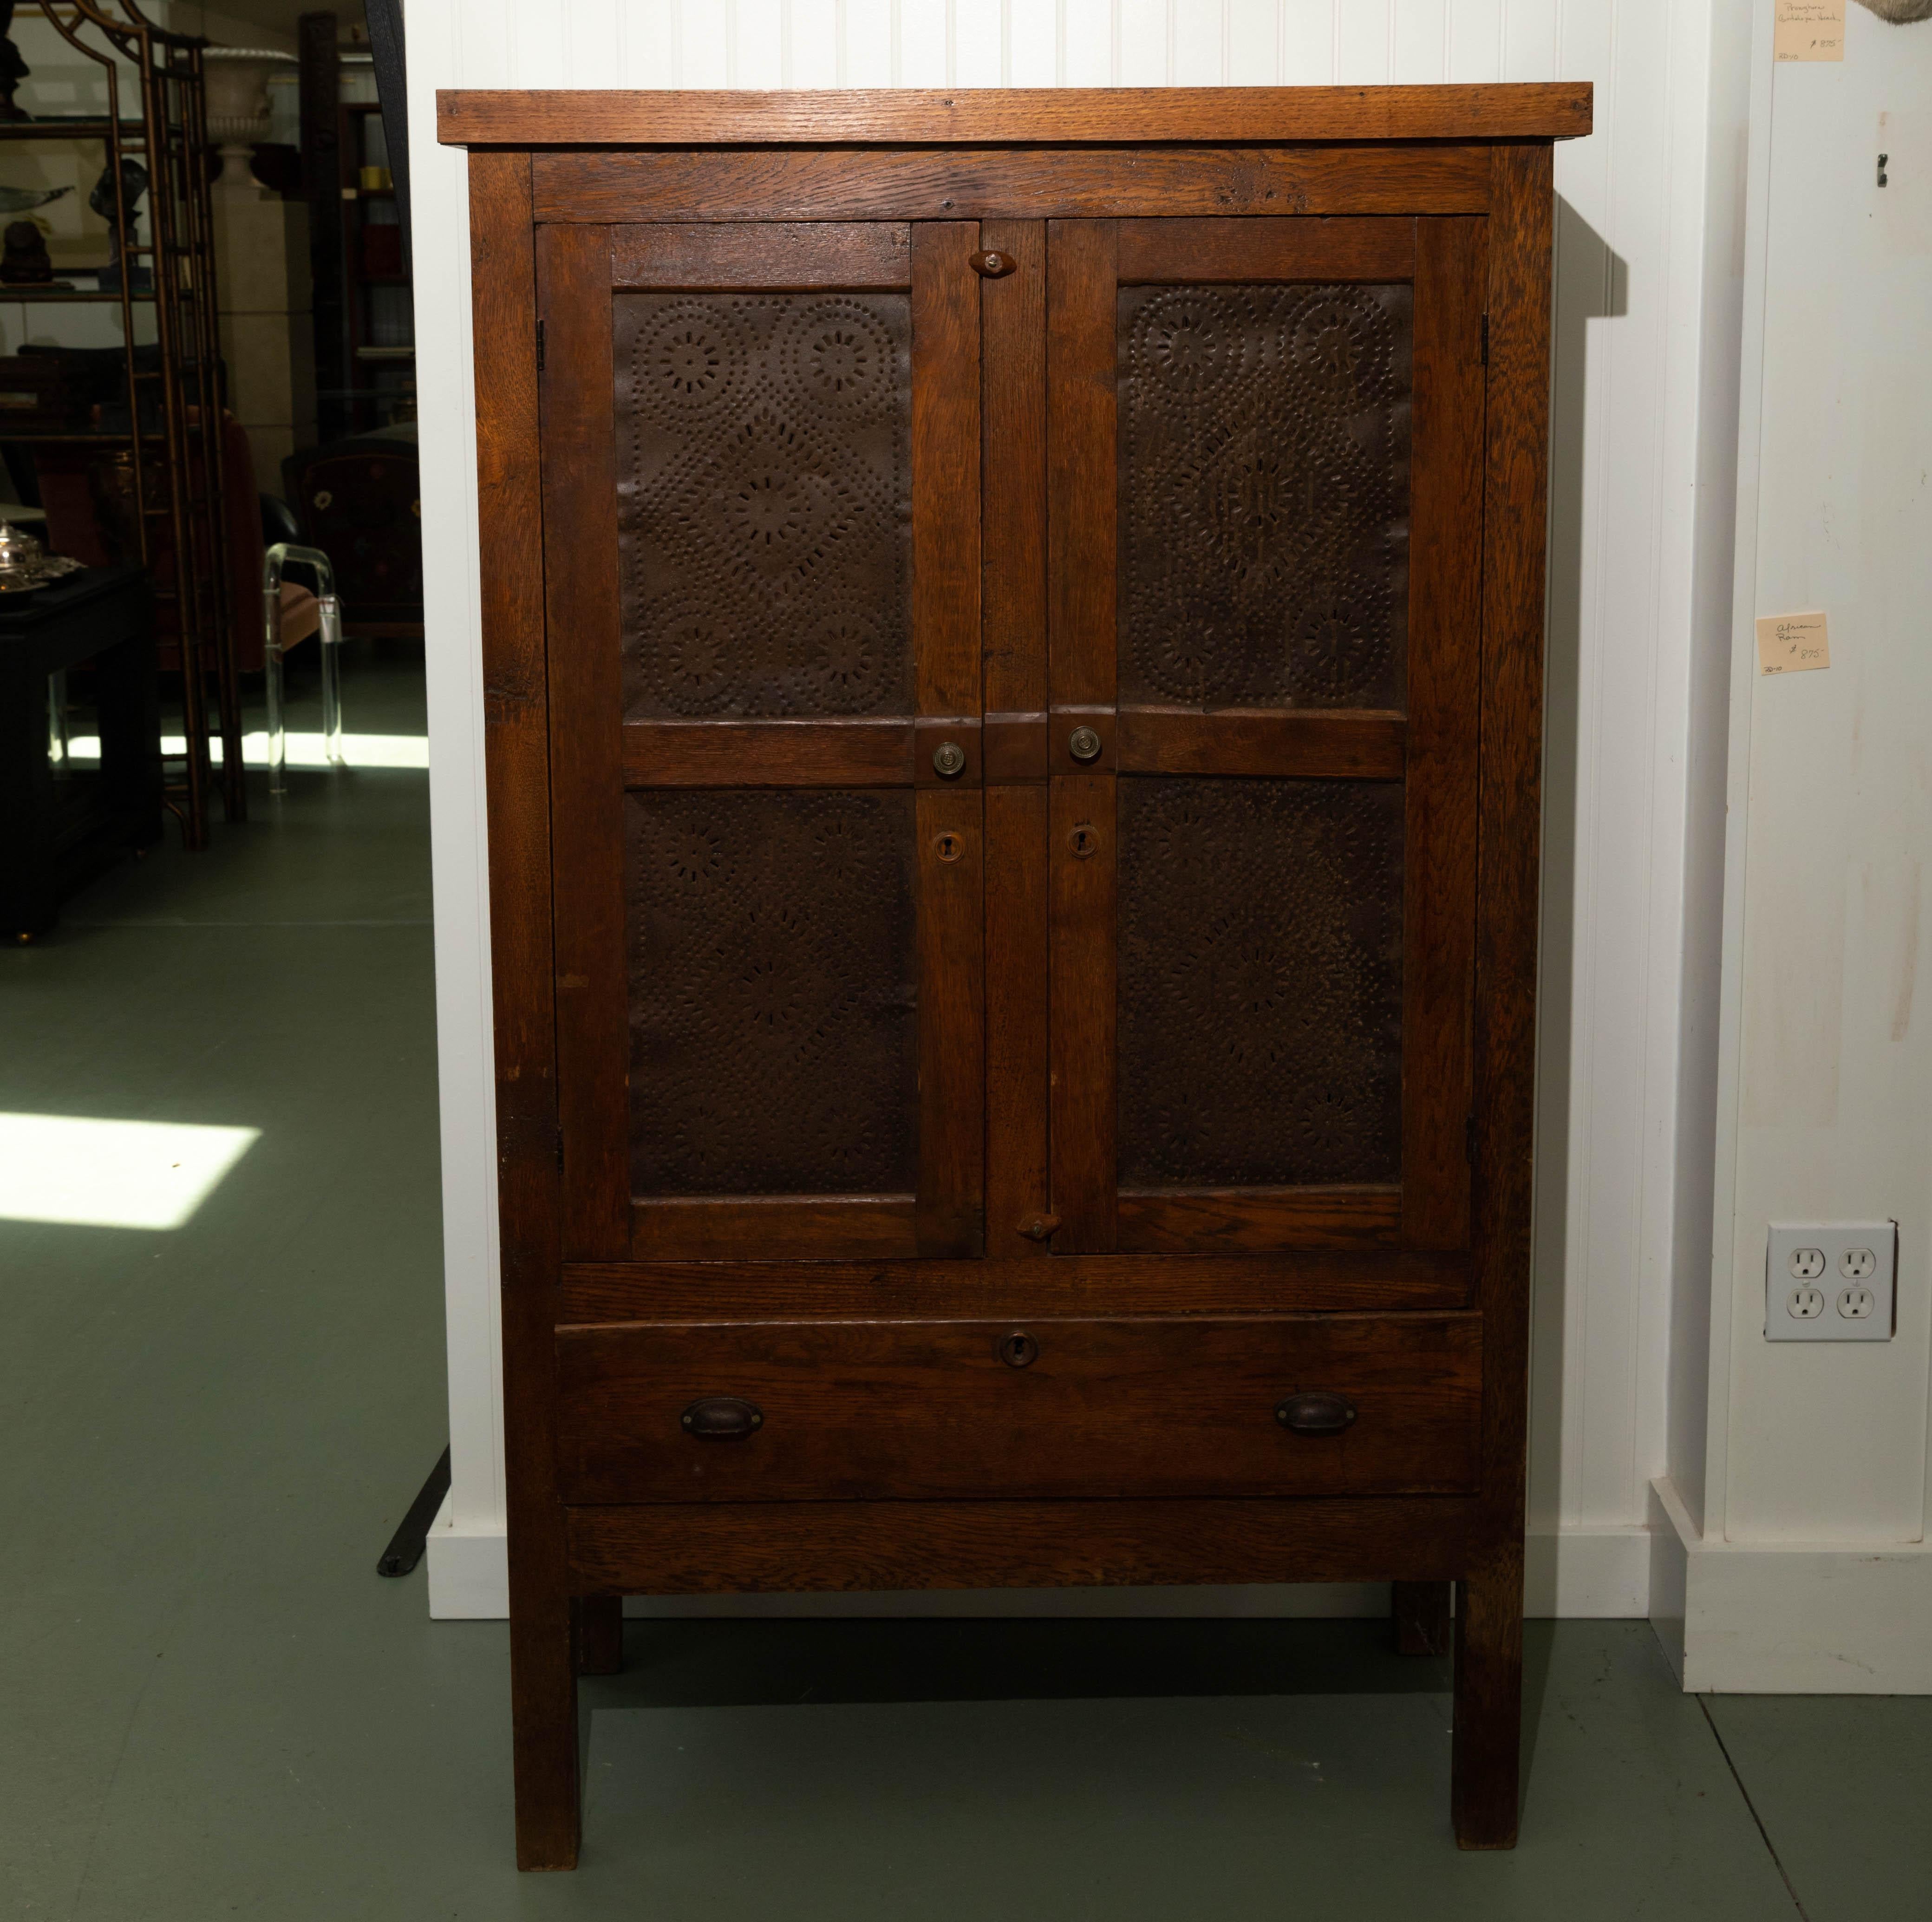 Early 19th century pie safe. Two-door over one drawer, interior two shelves, perforated tin panel doors. Five recessed panels on each side.
Original patina.